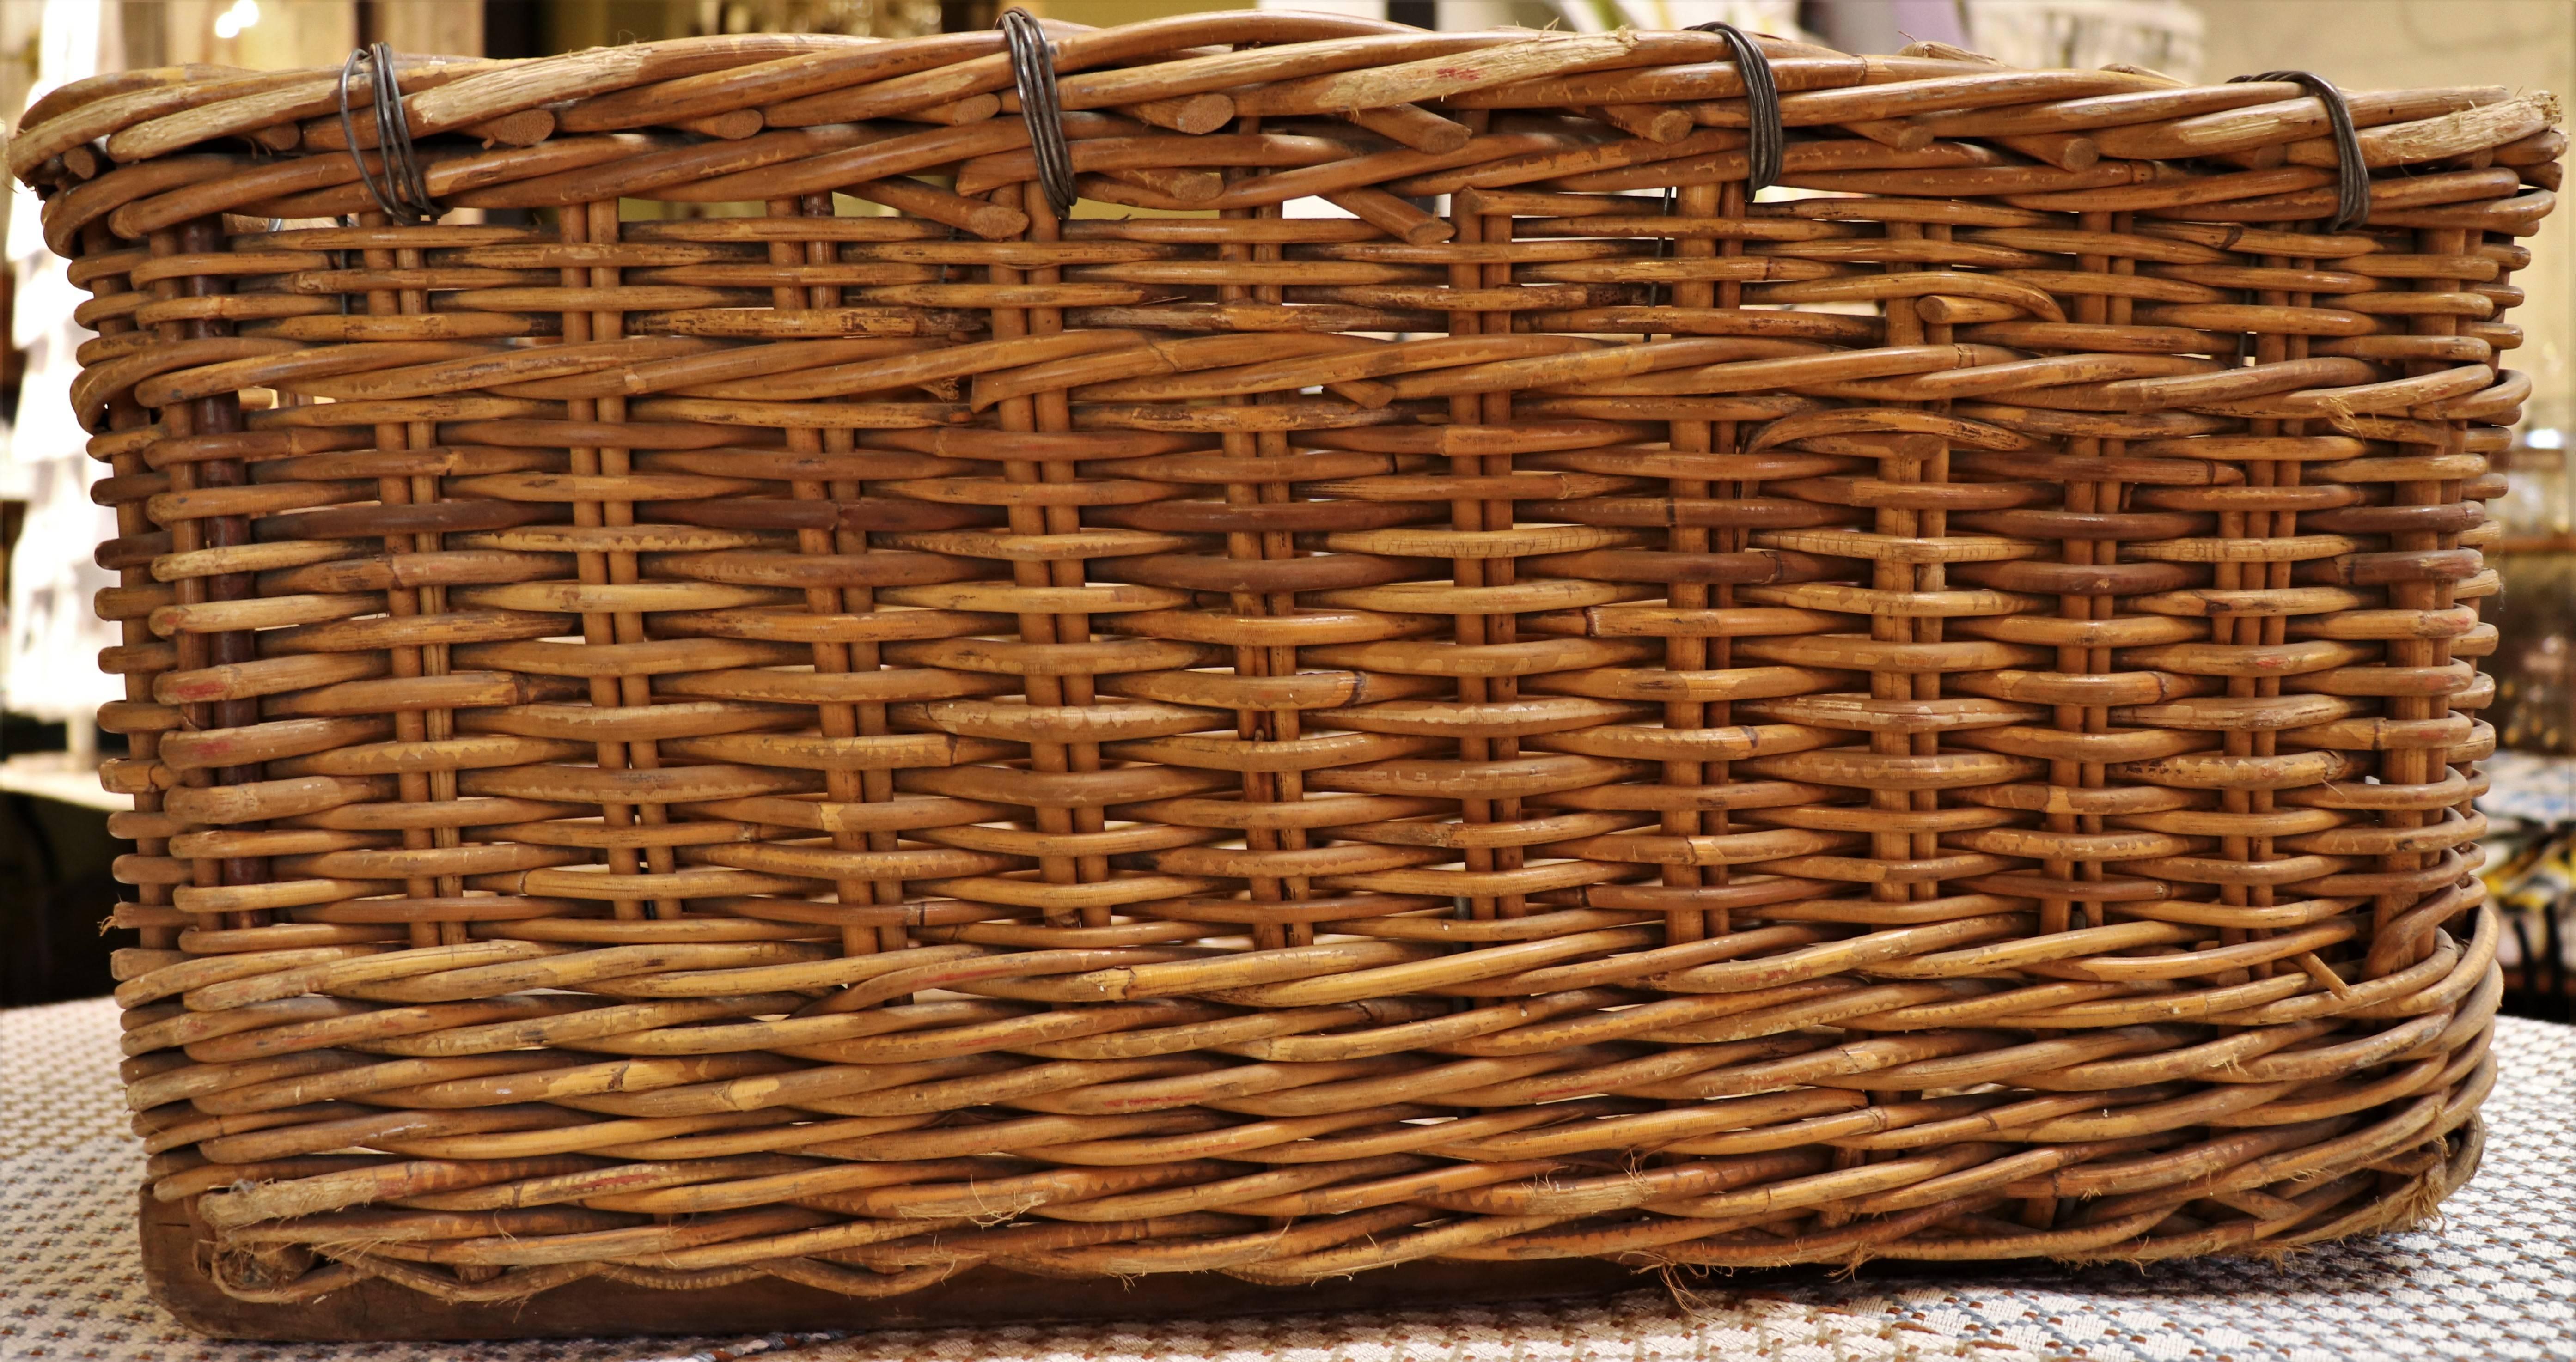 Hand-Crafted Nice, French Wicker Basket, Circa 1940